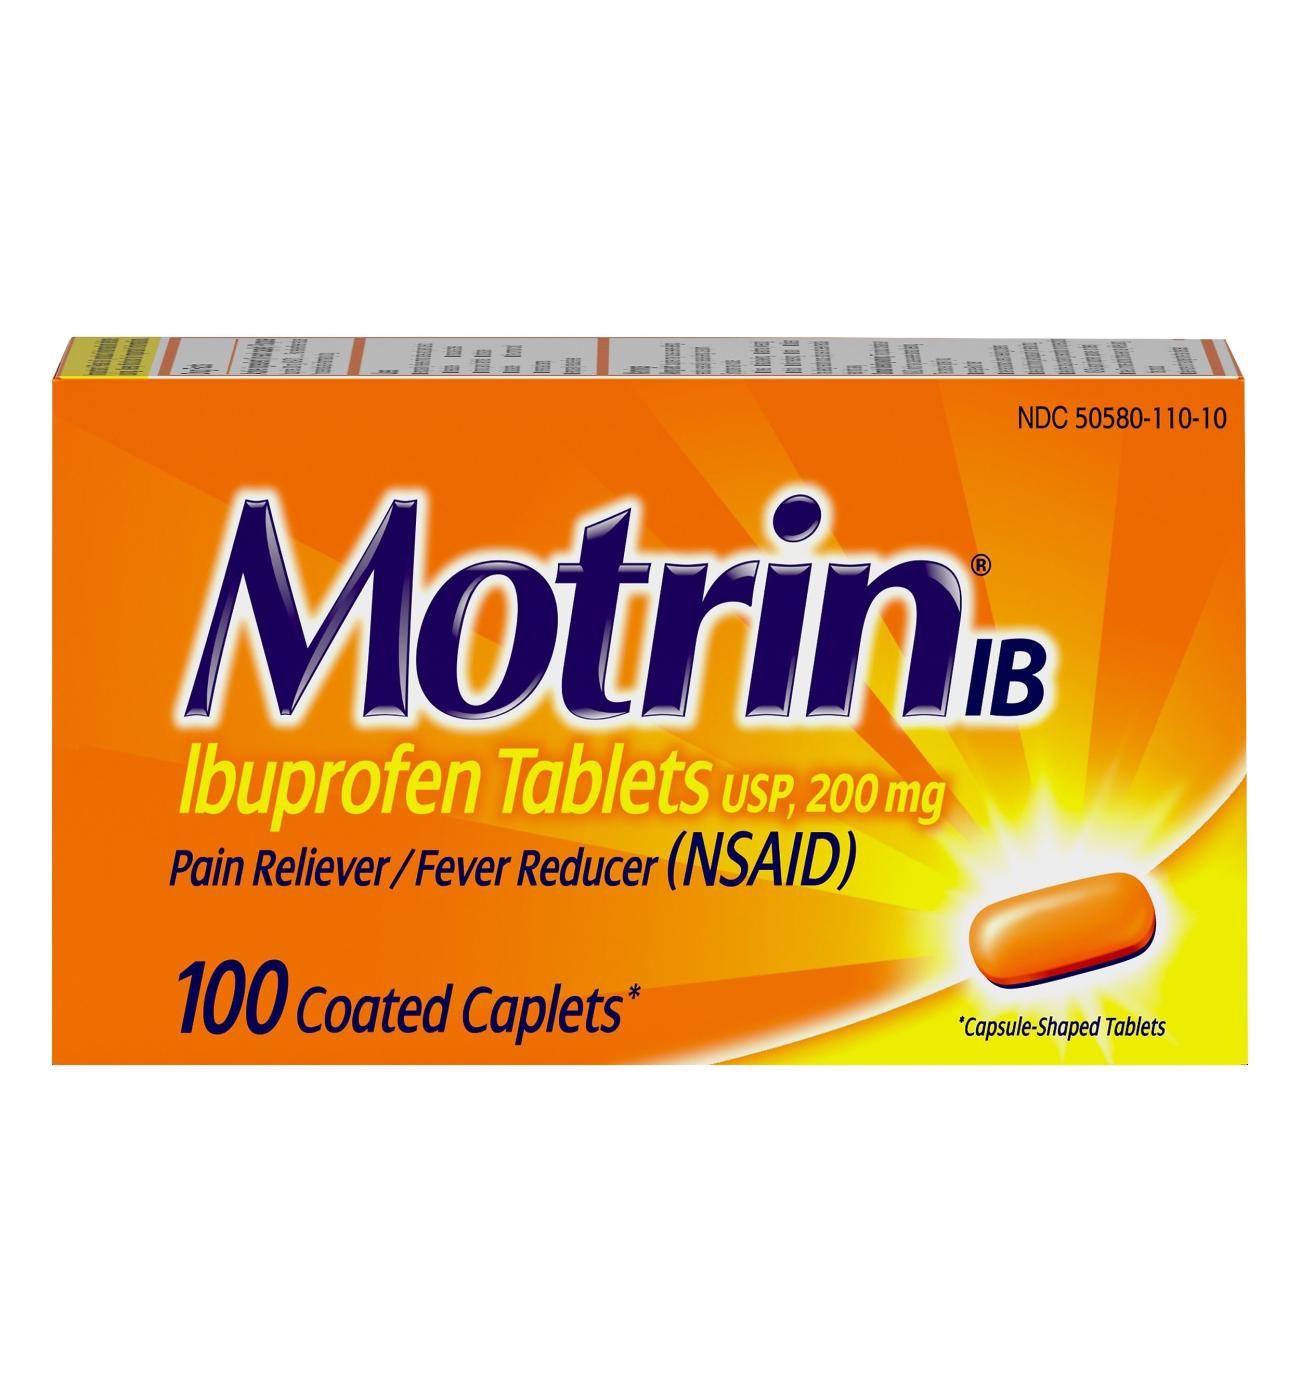 Motrin IB Pain Reliever Tablets - 200 mg; image 1 of 6